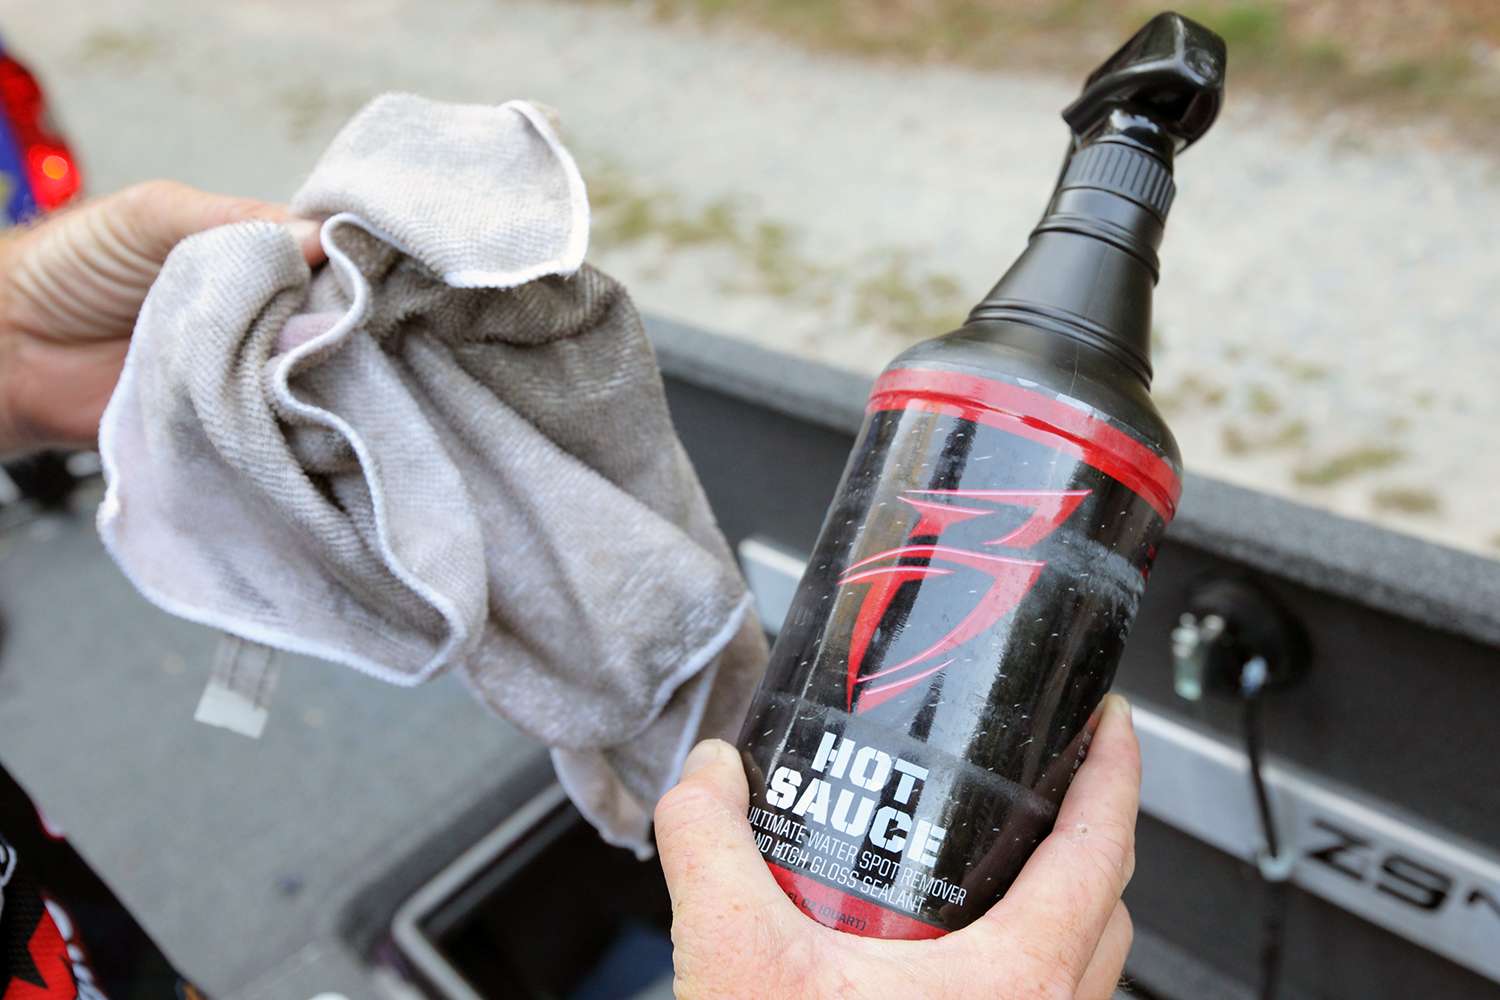 The bottle of Boat Bling's Hot Sauce cleaner and a cleaning towel came in handy during a long, dirty tournament season. The cleaner removes hard water spots, mineral deposits and exhaust residue.